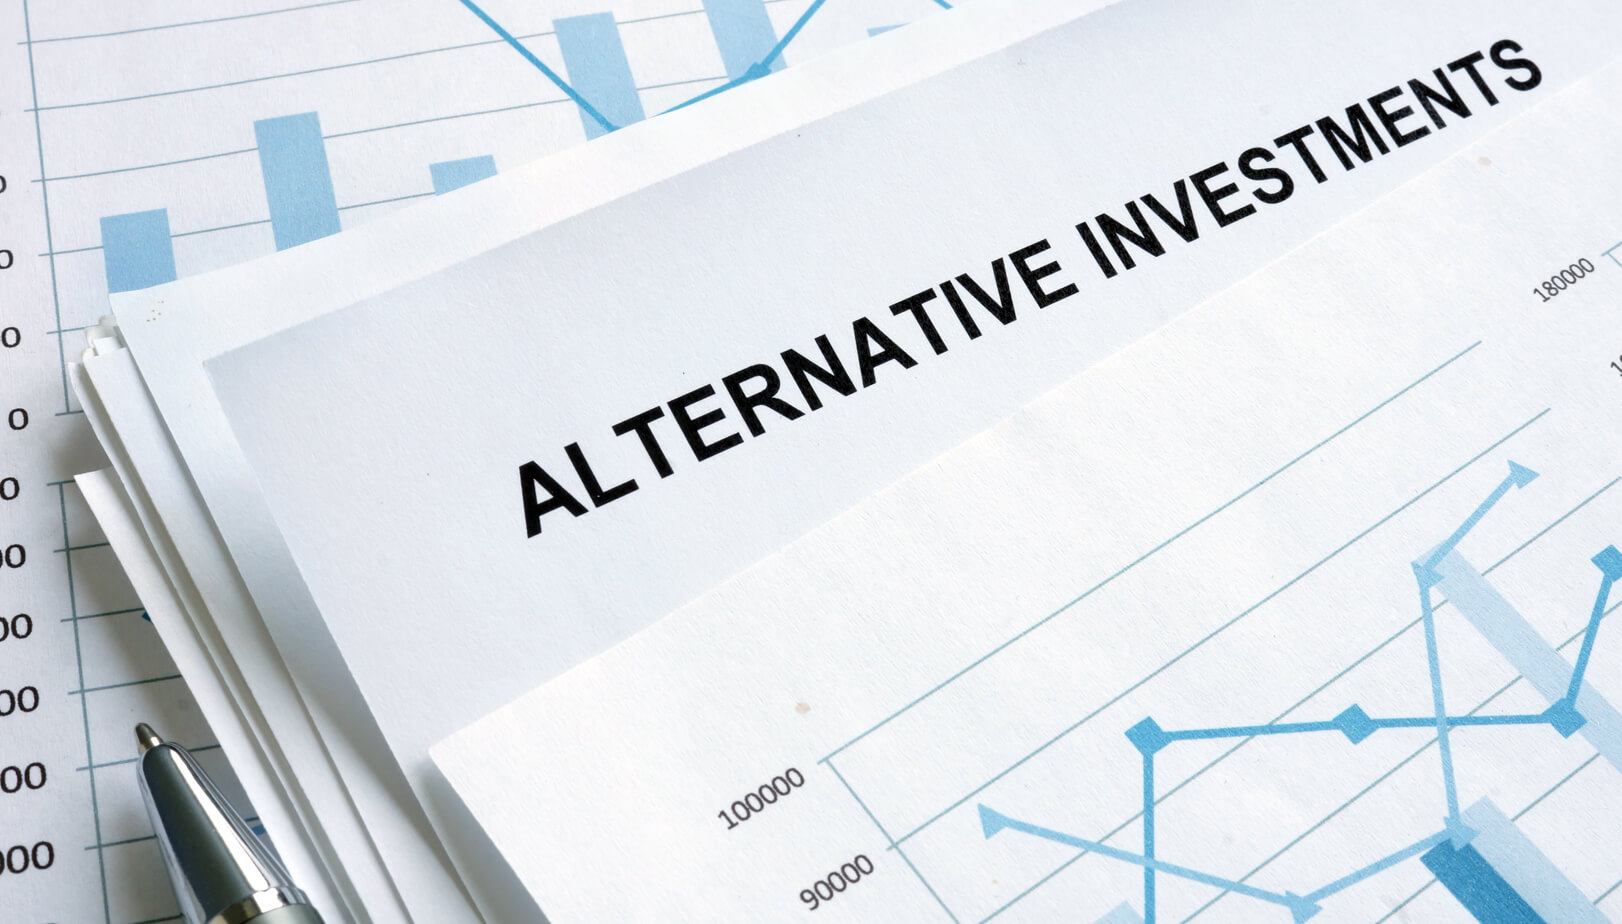 What Are Alternative Investments?